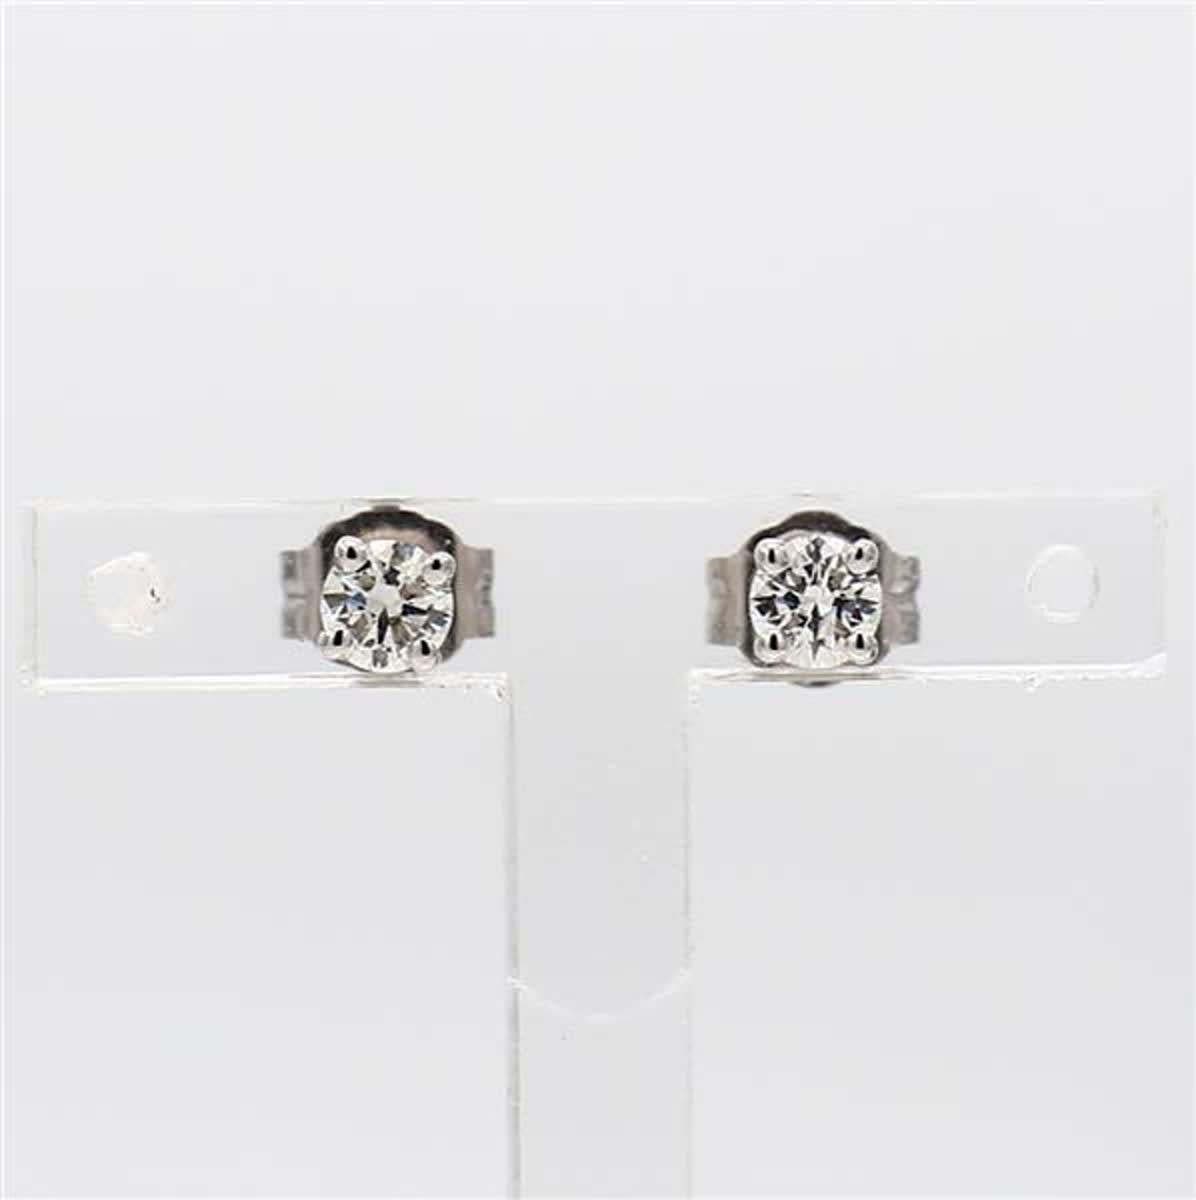 RareGemWorld's classic natural round cut white diamond earrings. Mounted in a beautiful 14K White Gold setting with natural round cut white diamonds. These earrings are guaranteed to impress and enhance your personal collection!

Total Weight: